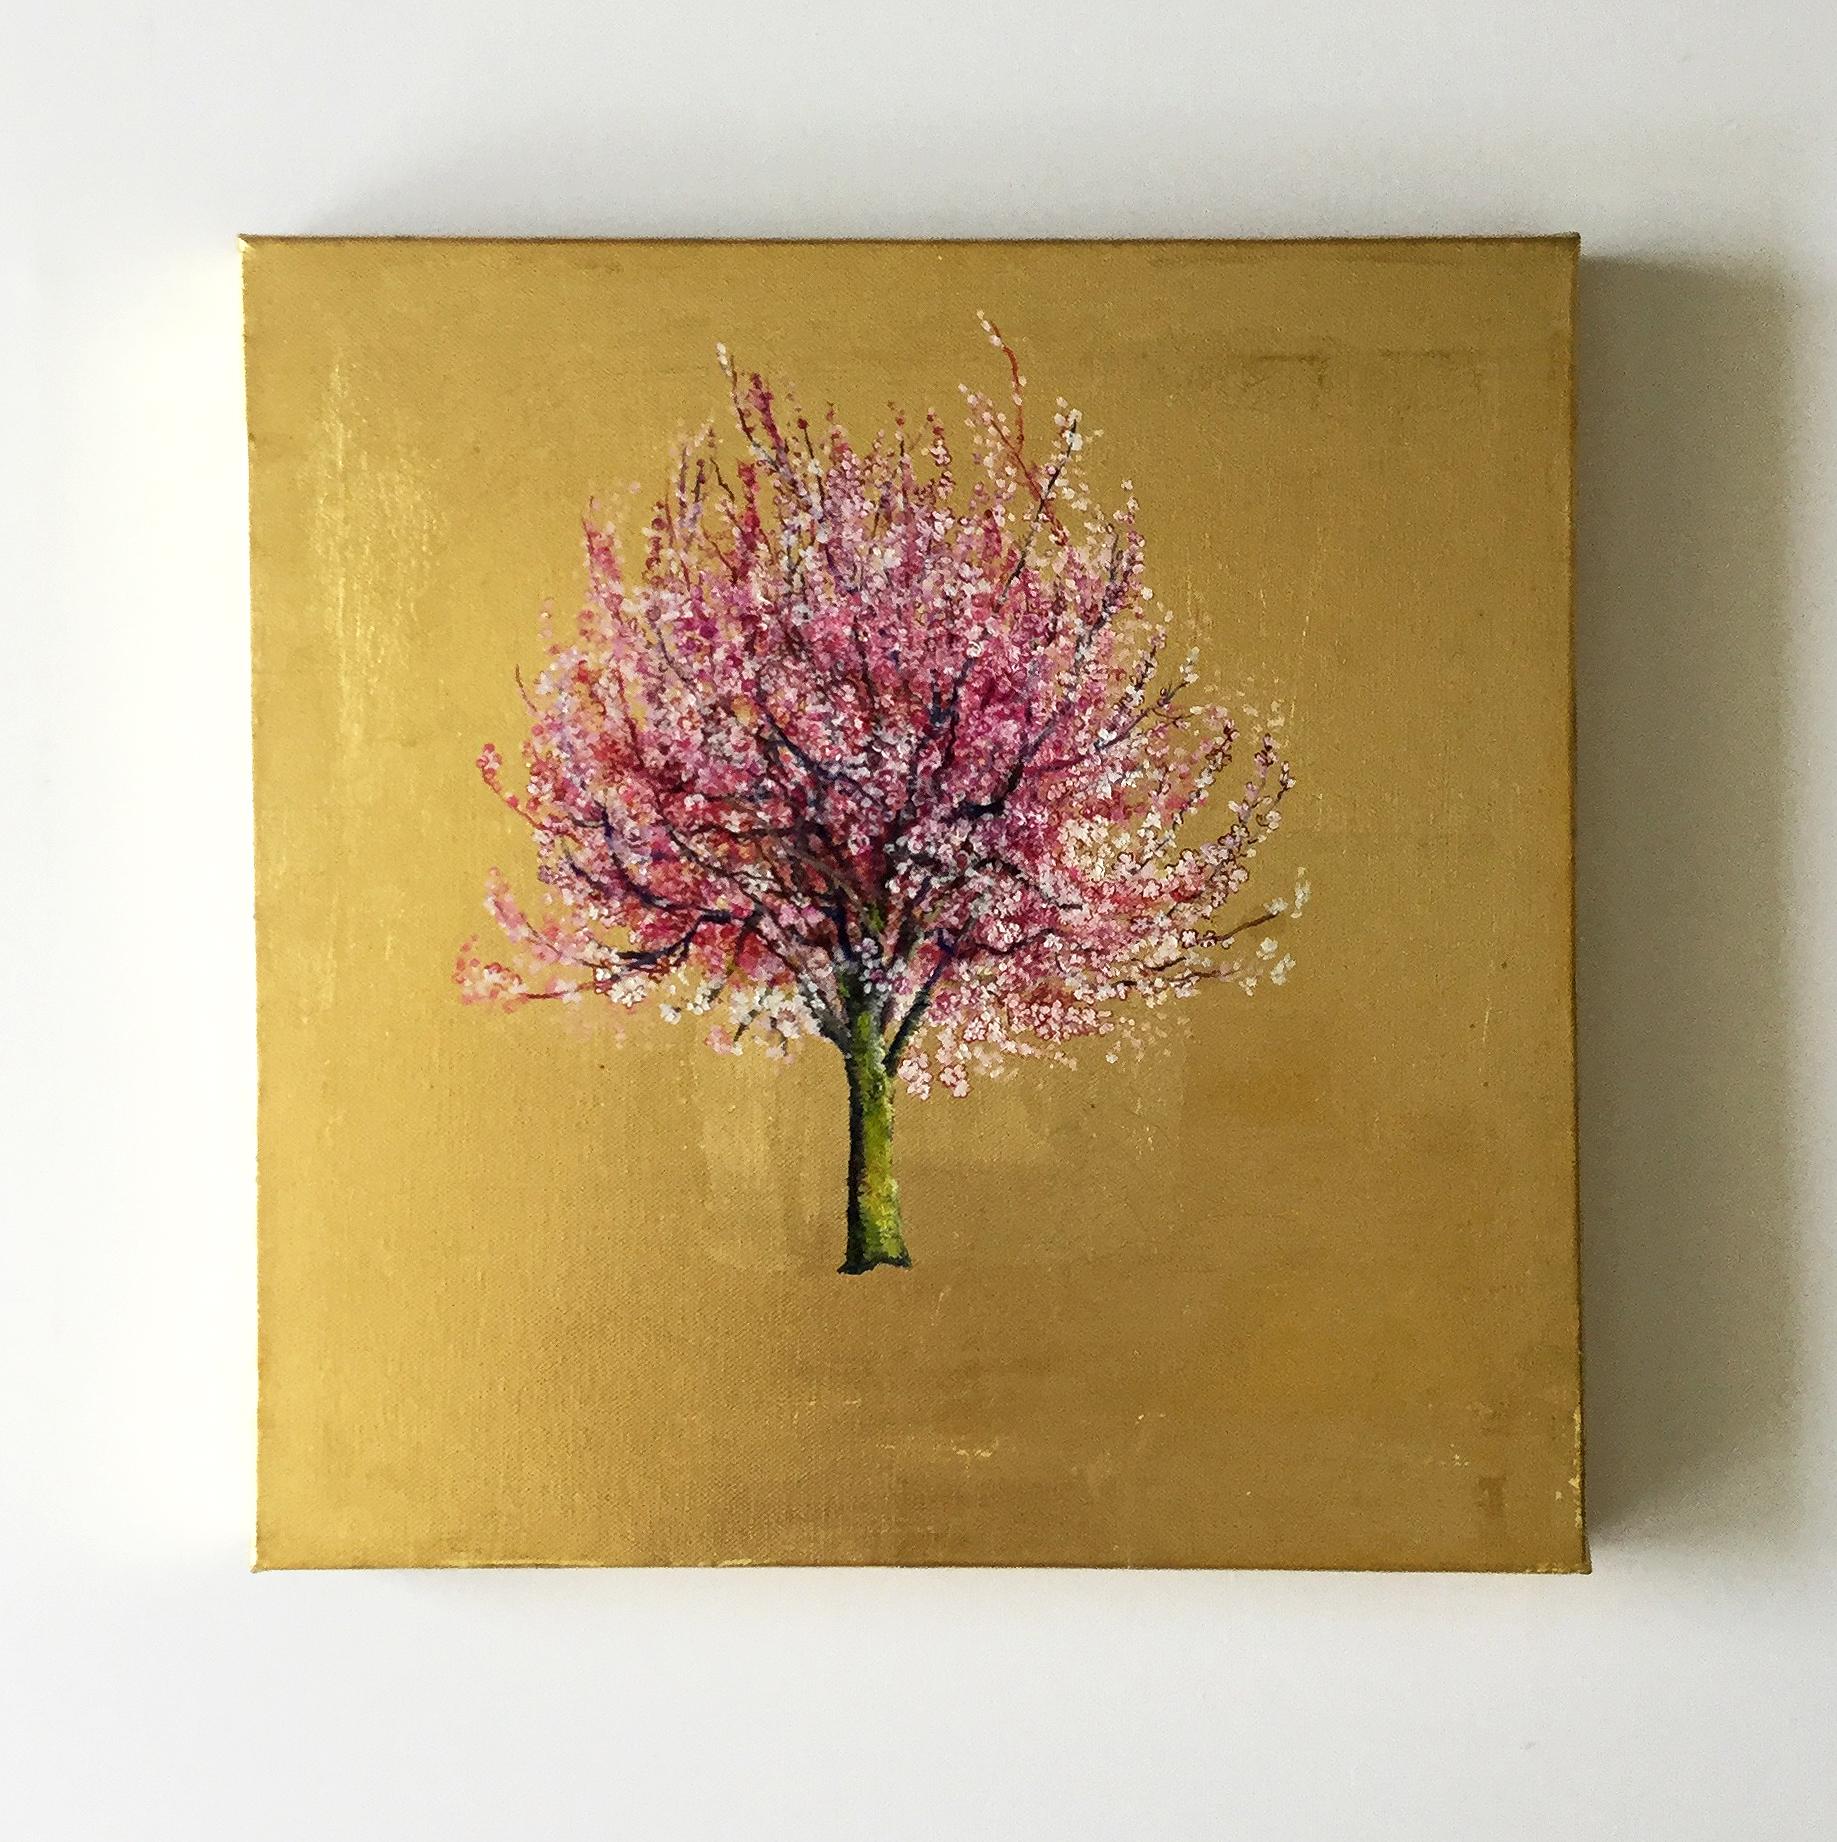 Anastasia Gklava Figurative Painting - Early Blossom, Elegant Oil on Canvas with Gold Leaf, Pink Tree & Flowers 